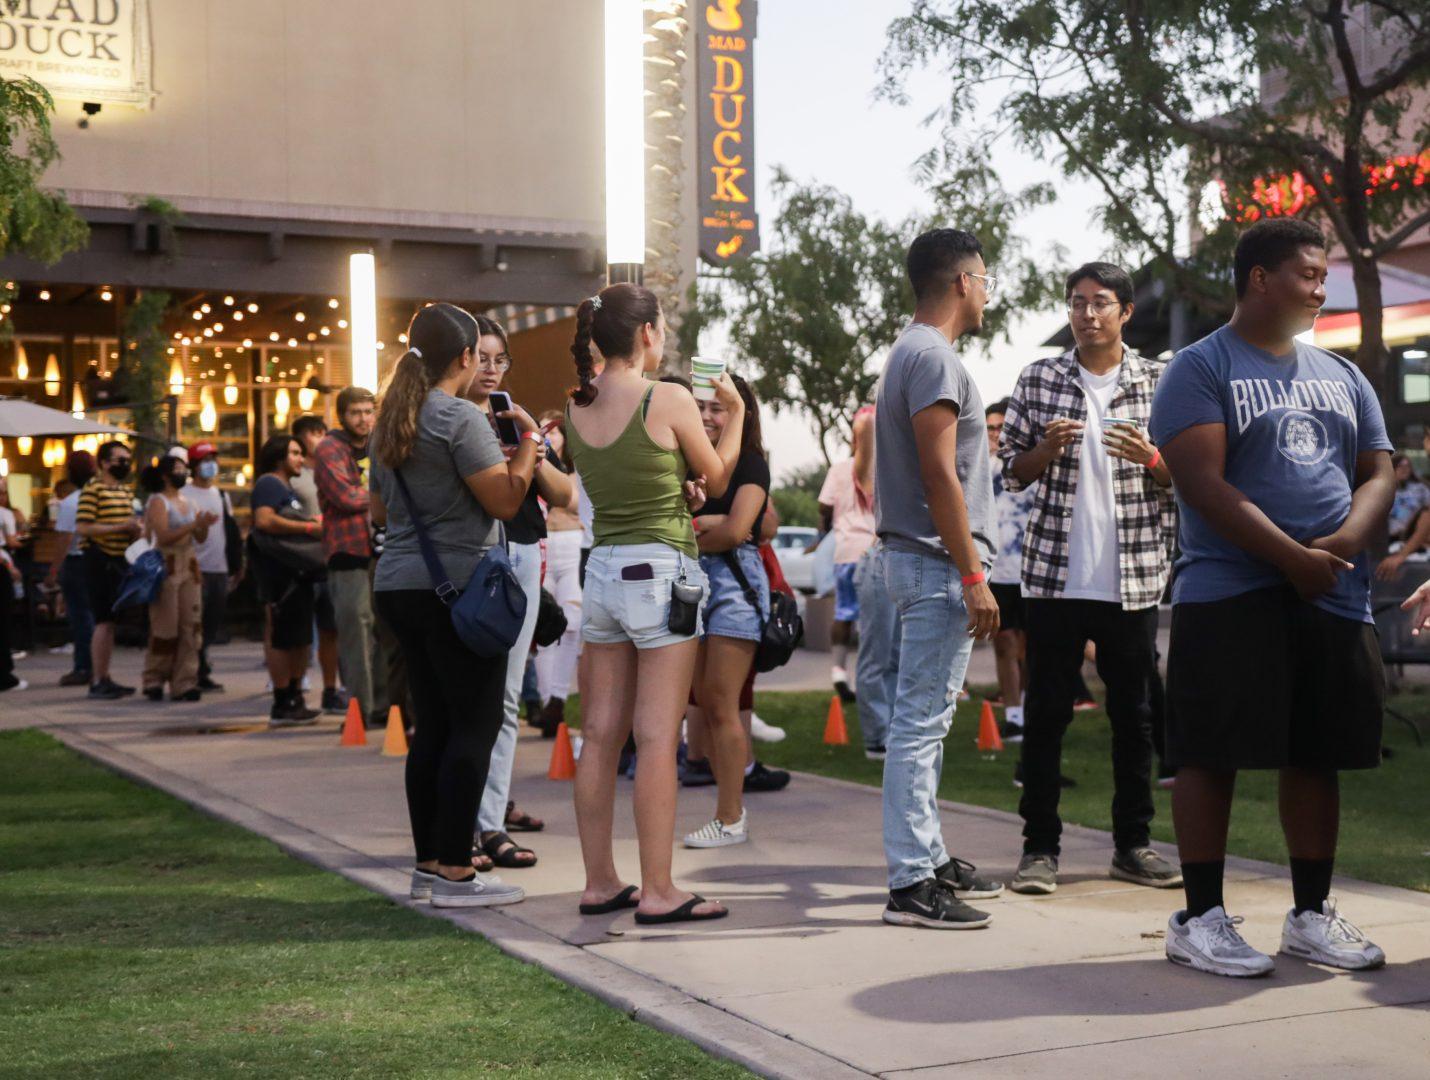 Students wait in line for a photo booth at Fresno States Night at Campus Pointe on Thursday, August 25, 2022. (Carlos Rene Castro/The Collegian)